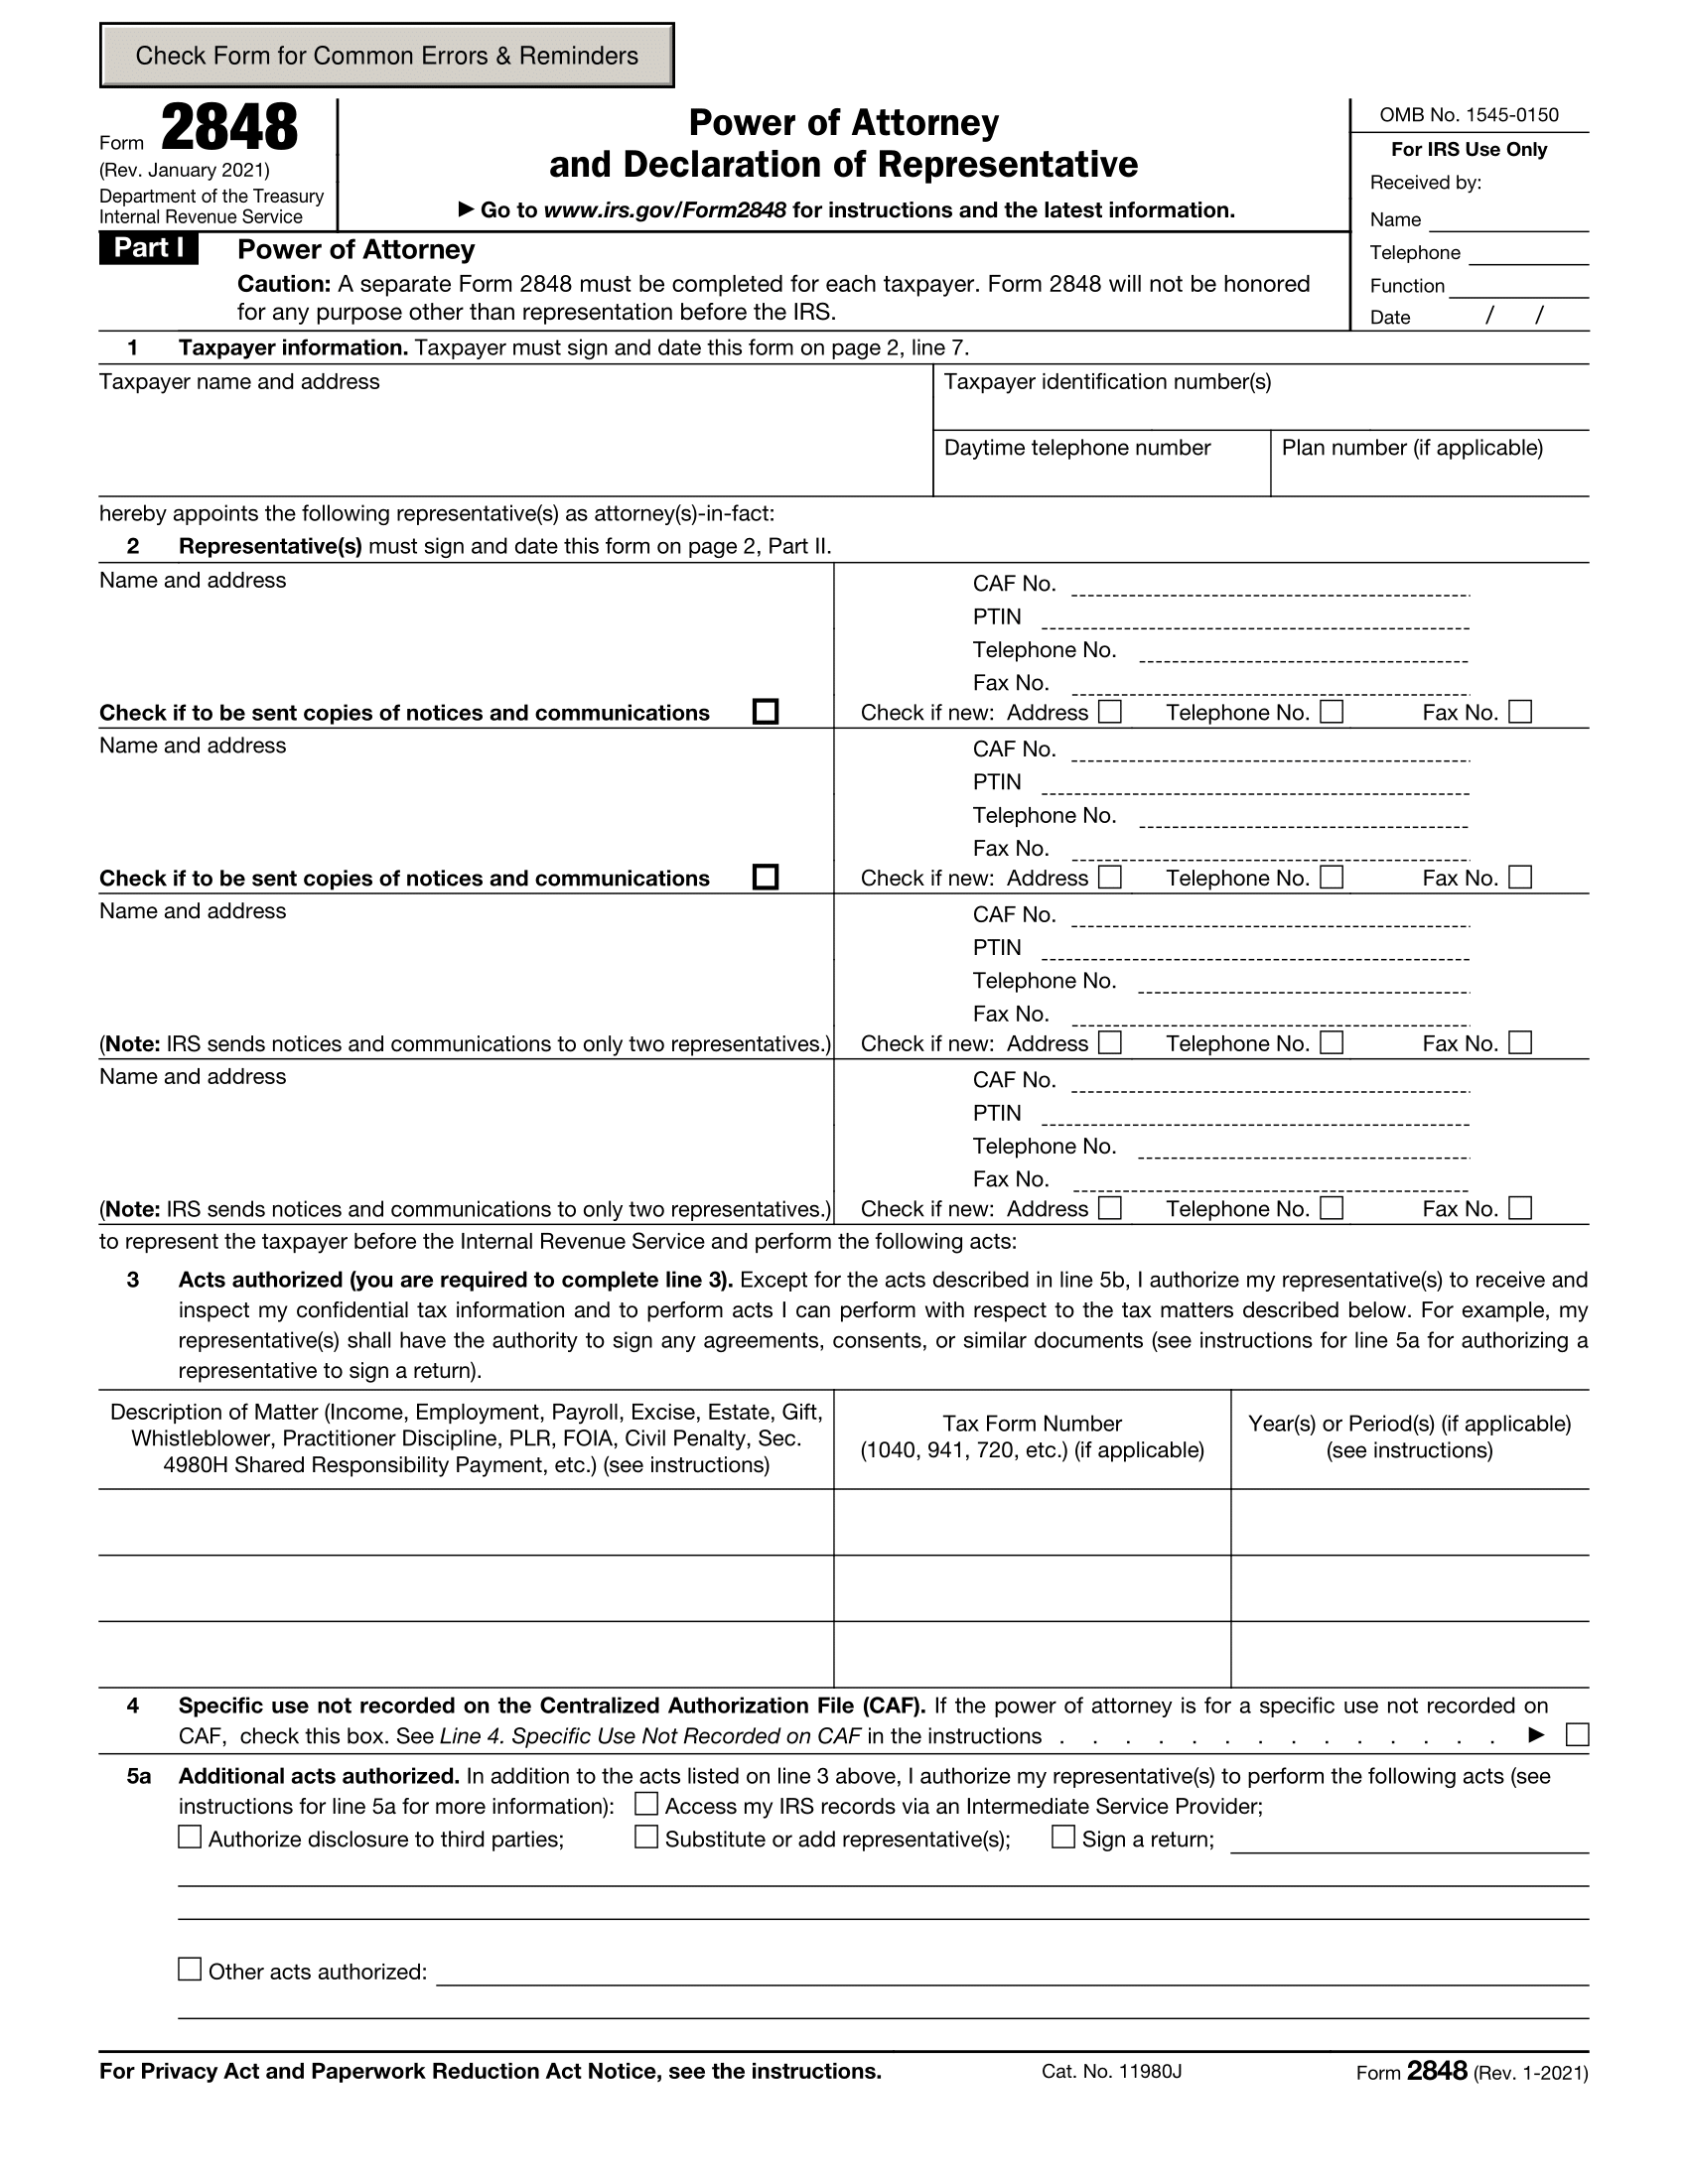 IRS-Power-of-Attorney-and-Declaration-of-Representative-Form-2848